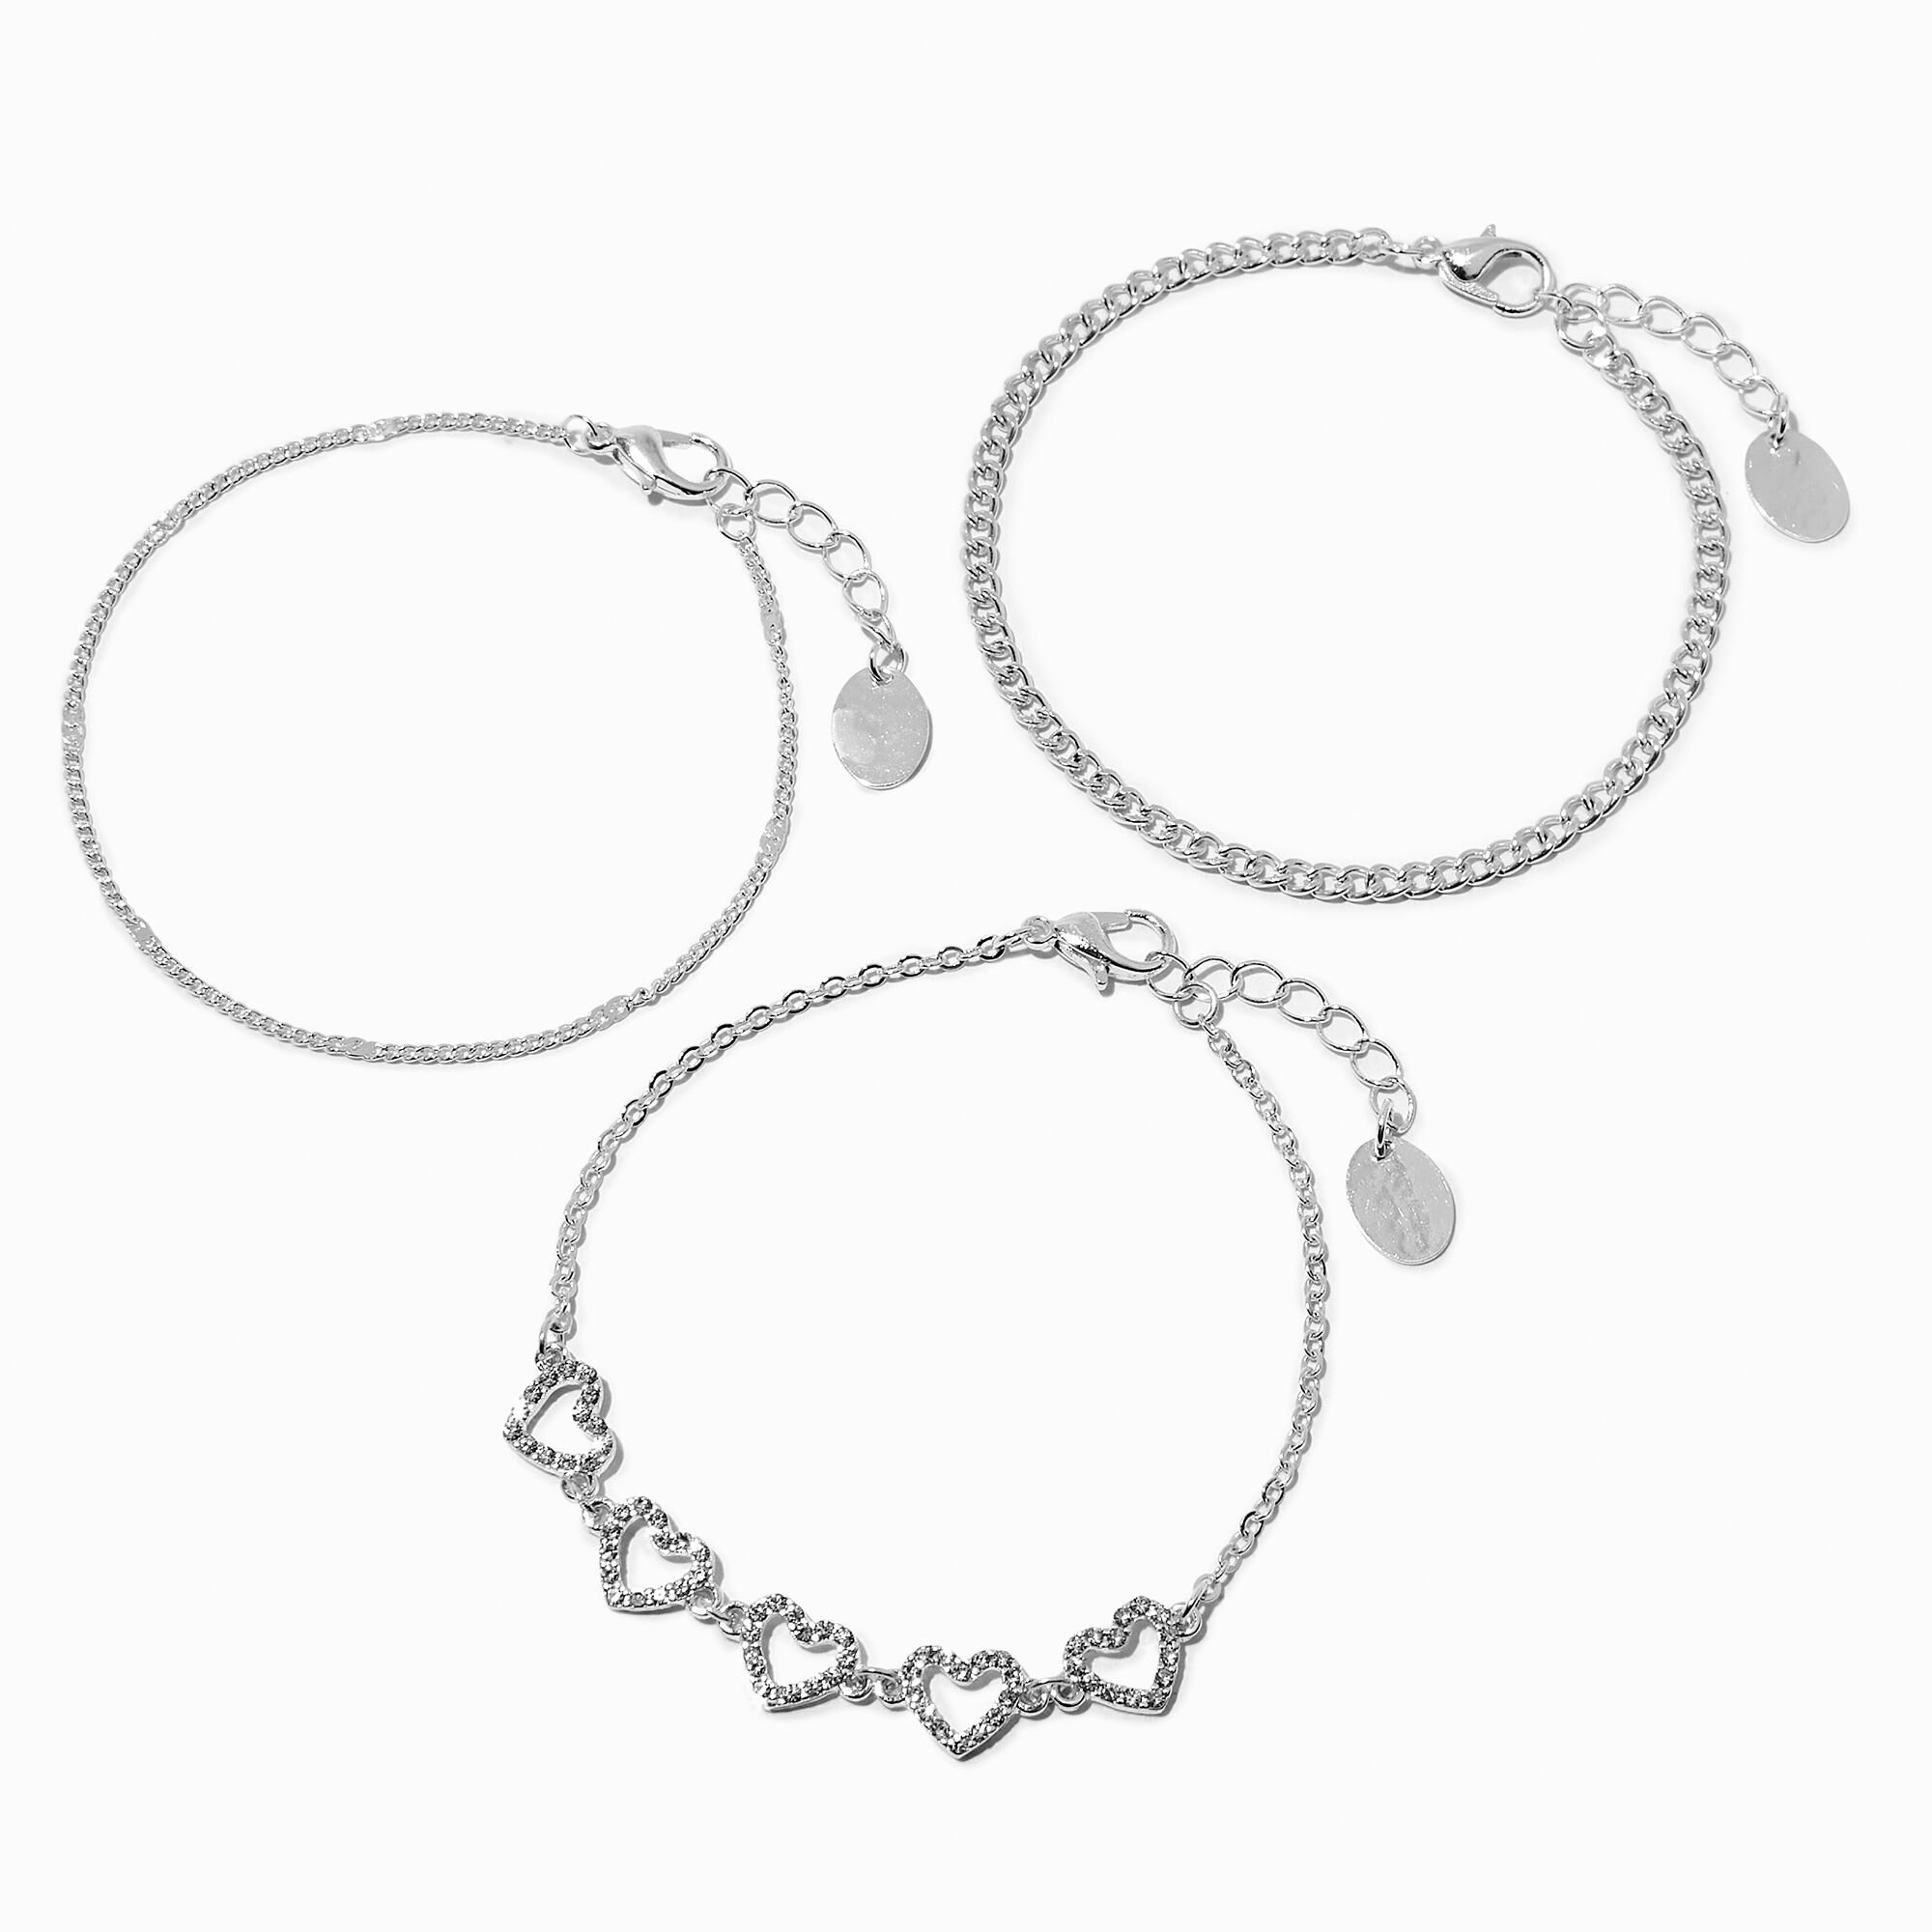 Aaishwarya 3 Pc Chain Pearl Inspired Link Bracelet Set (pack of 3) Alloy  For Women And Girls|Valentine gift for Girlfriend, Wife | Gift for Women :  Amazon.in: Fashion